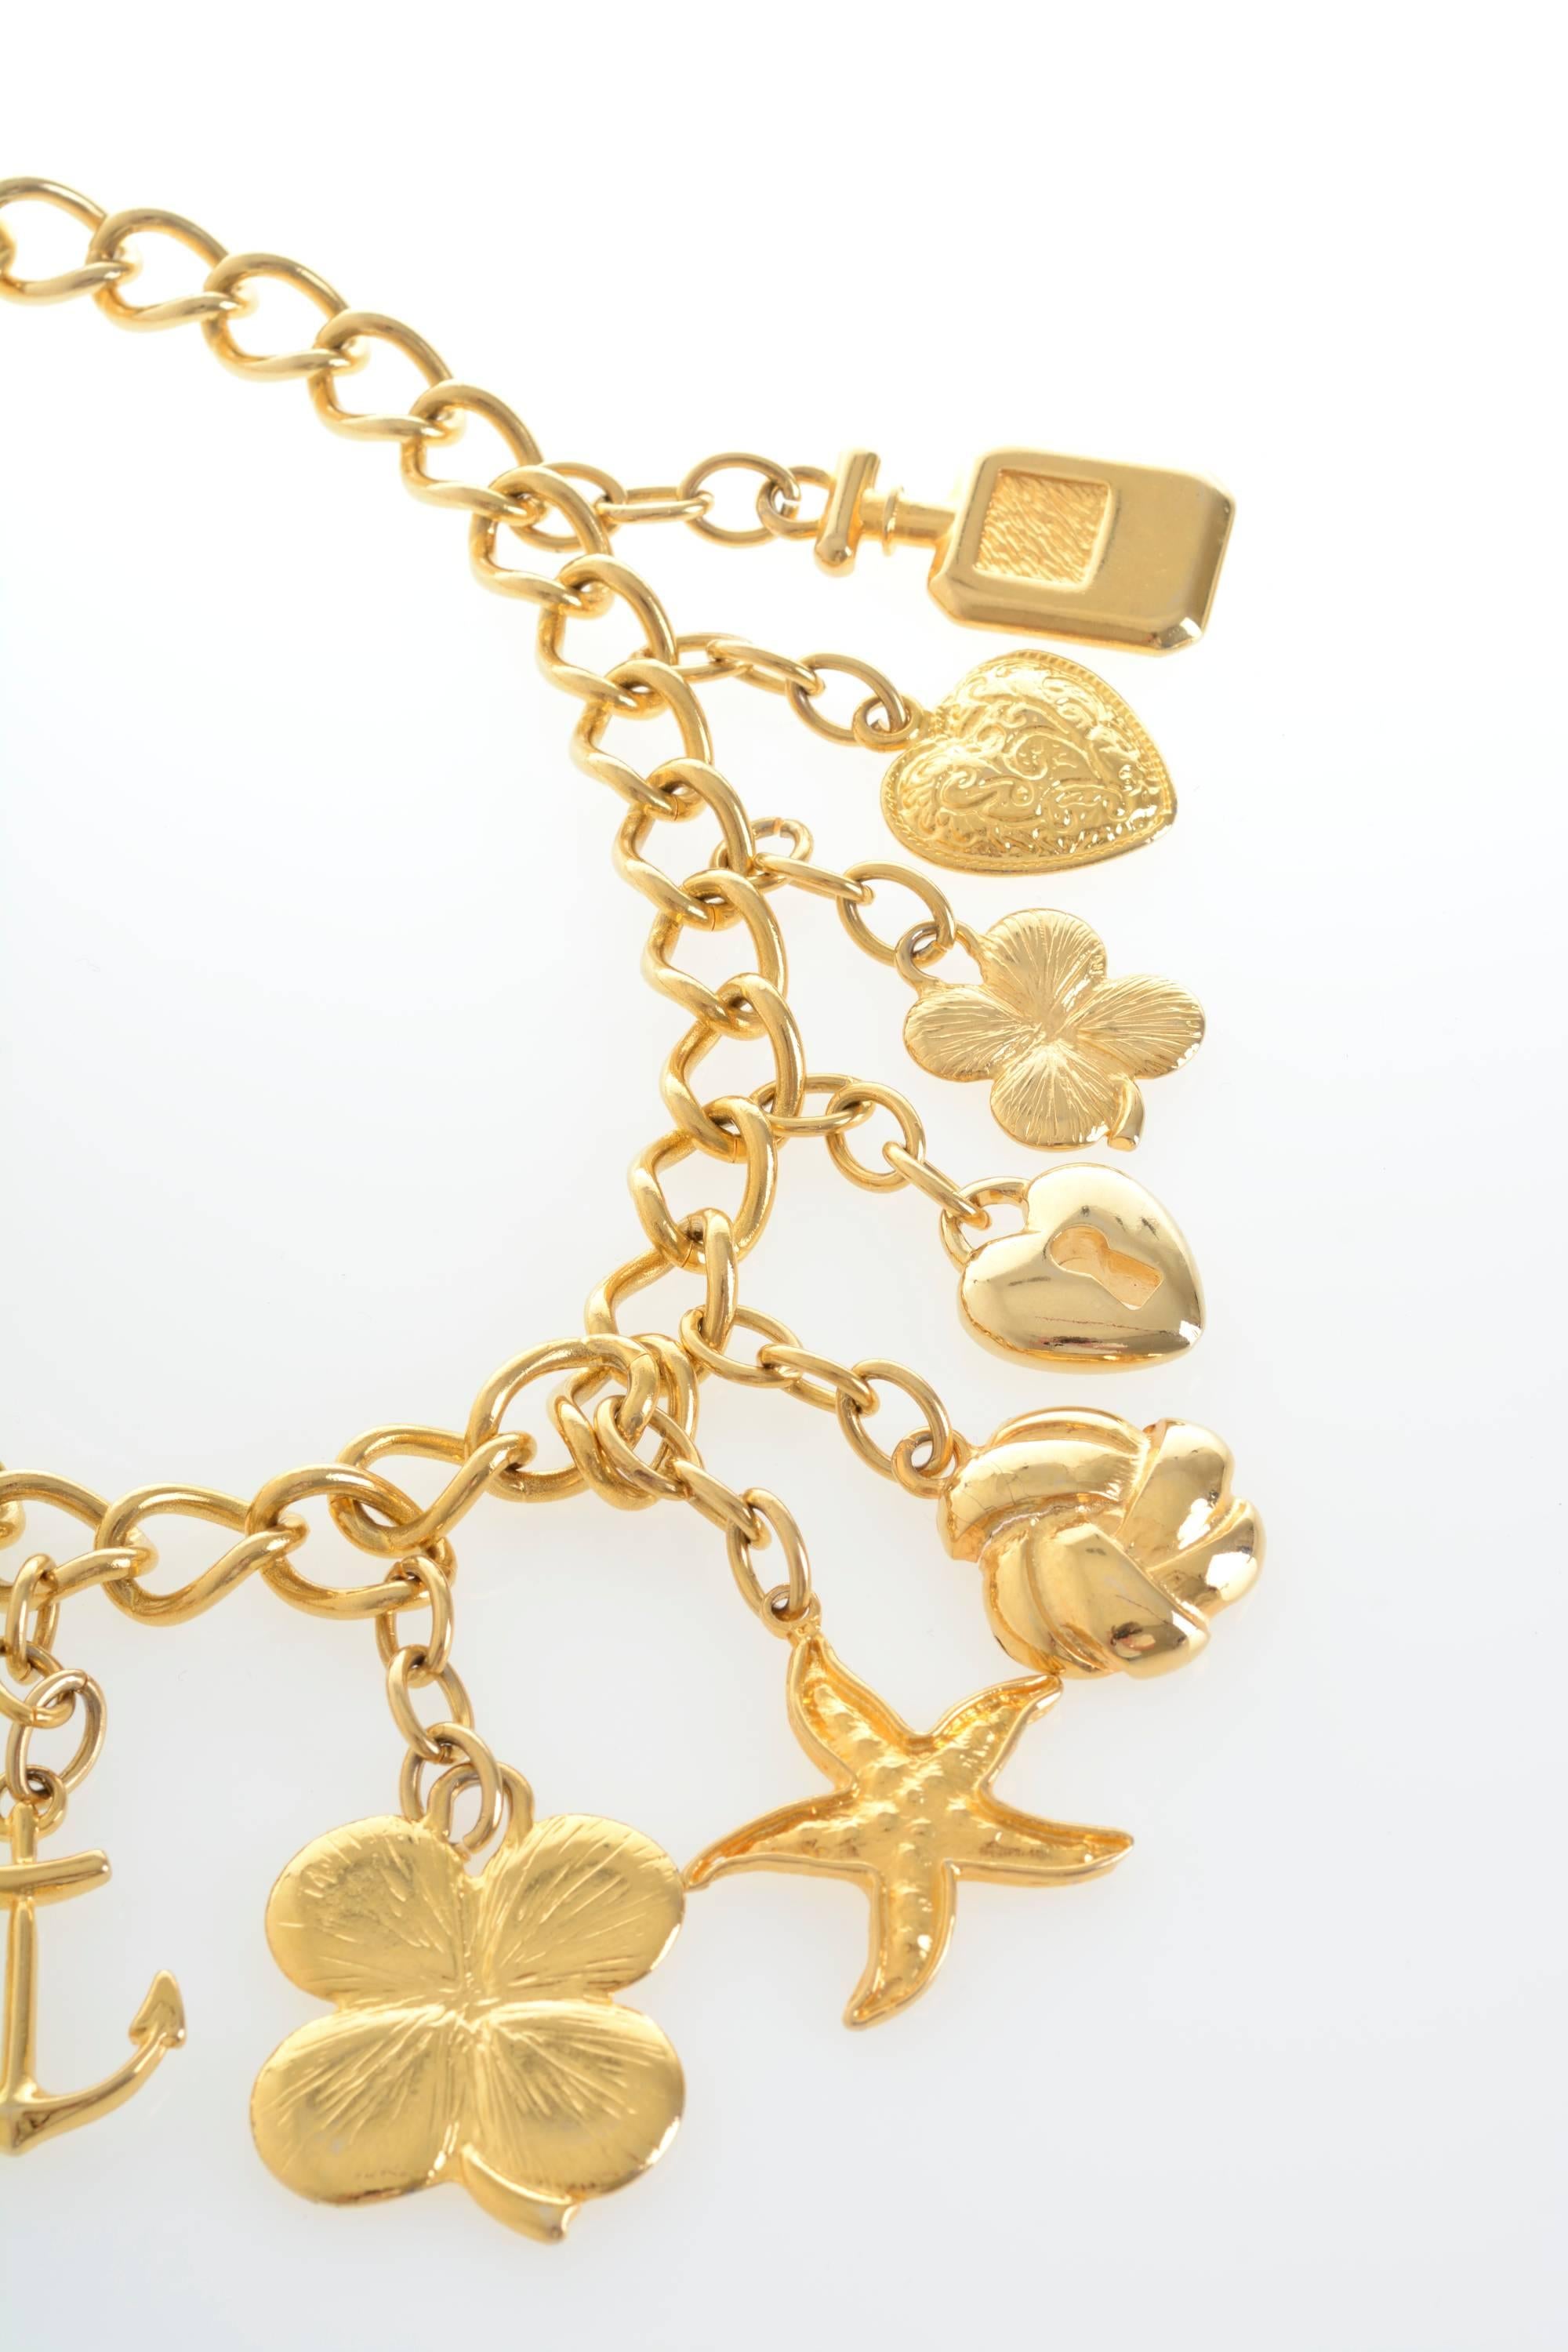 1980s UGO CORREANI Made in Italy Golden Metal Charms Chain Necklace 2